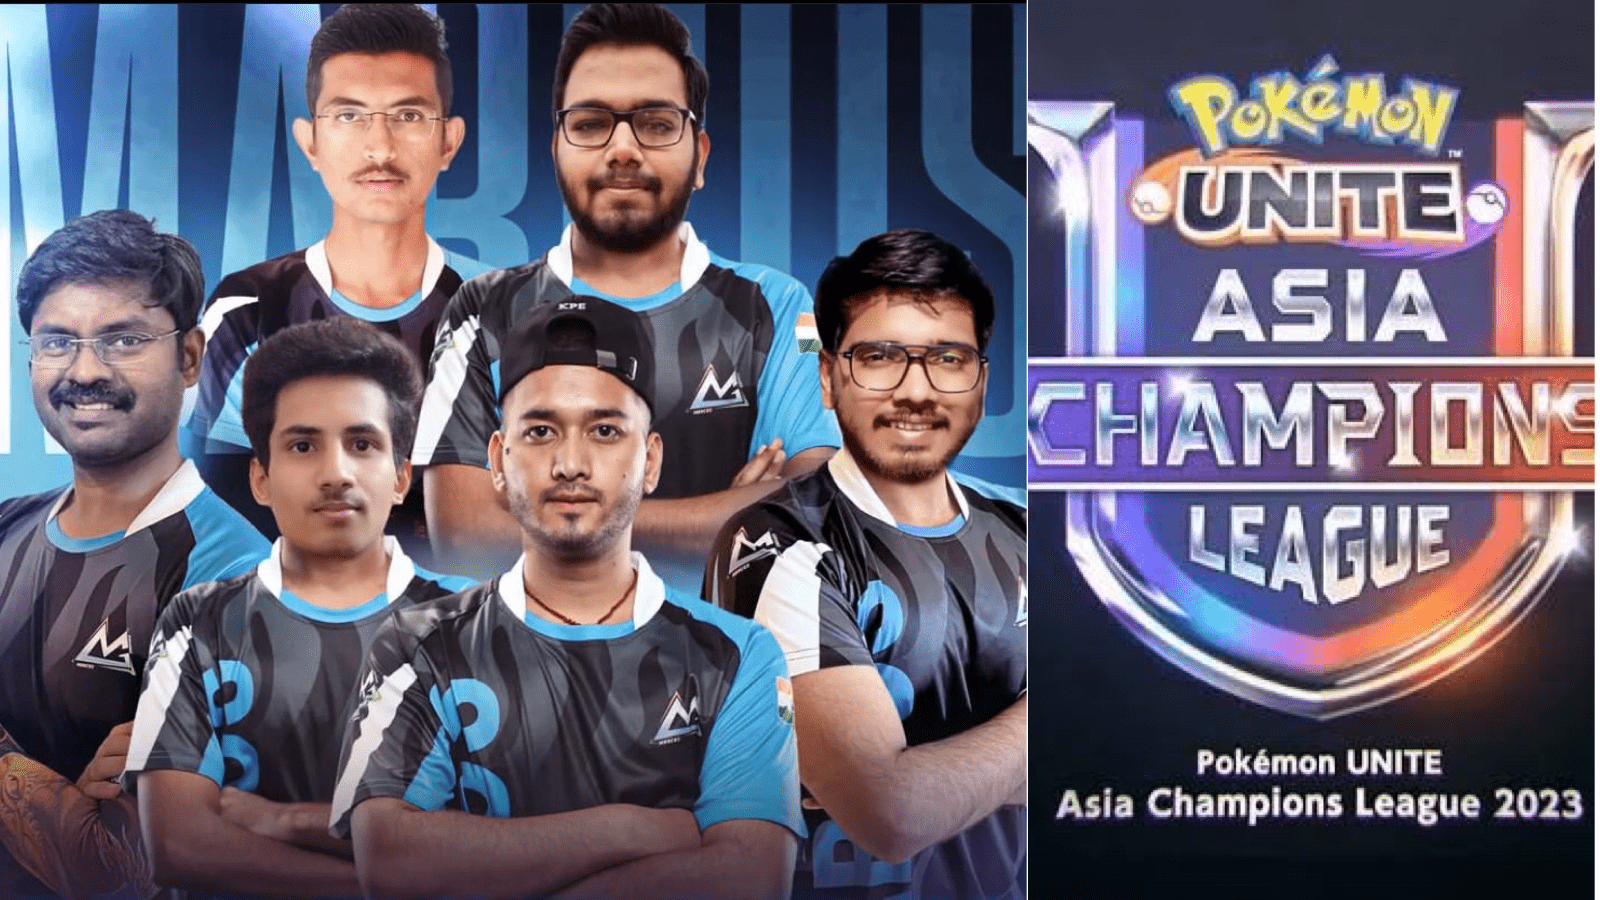 Marcos Gaming Shocks the Pokémon World, Qualifies for UNITE Asia Champions League Finals with Unbeaten Record!